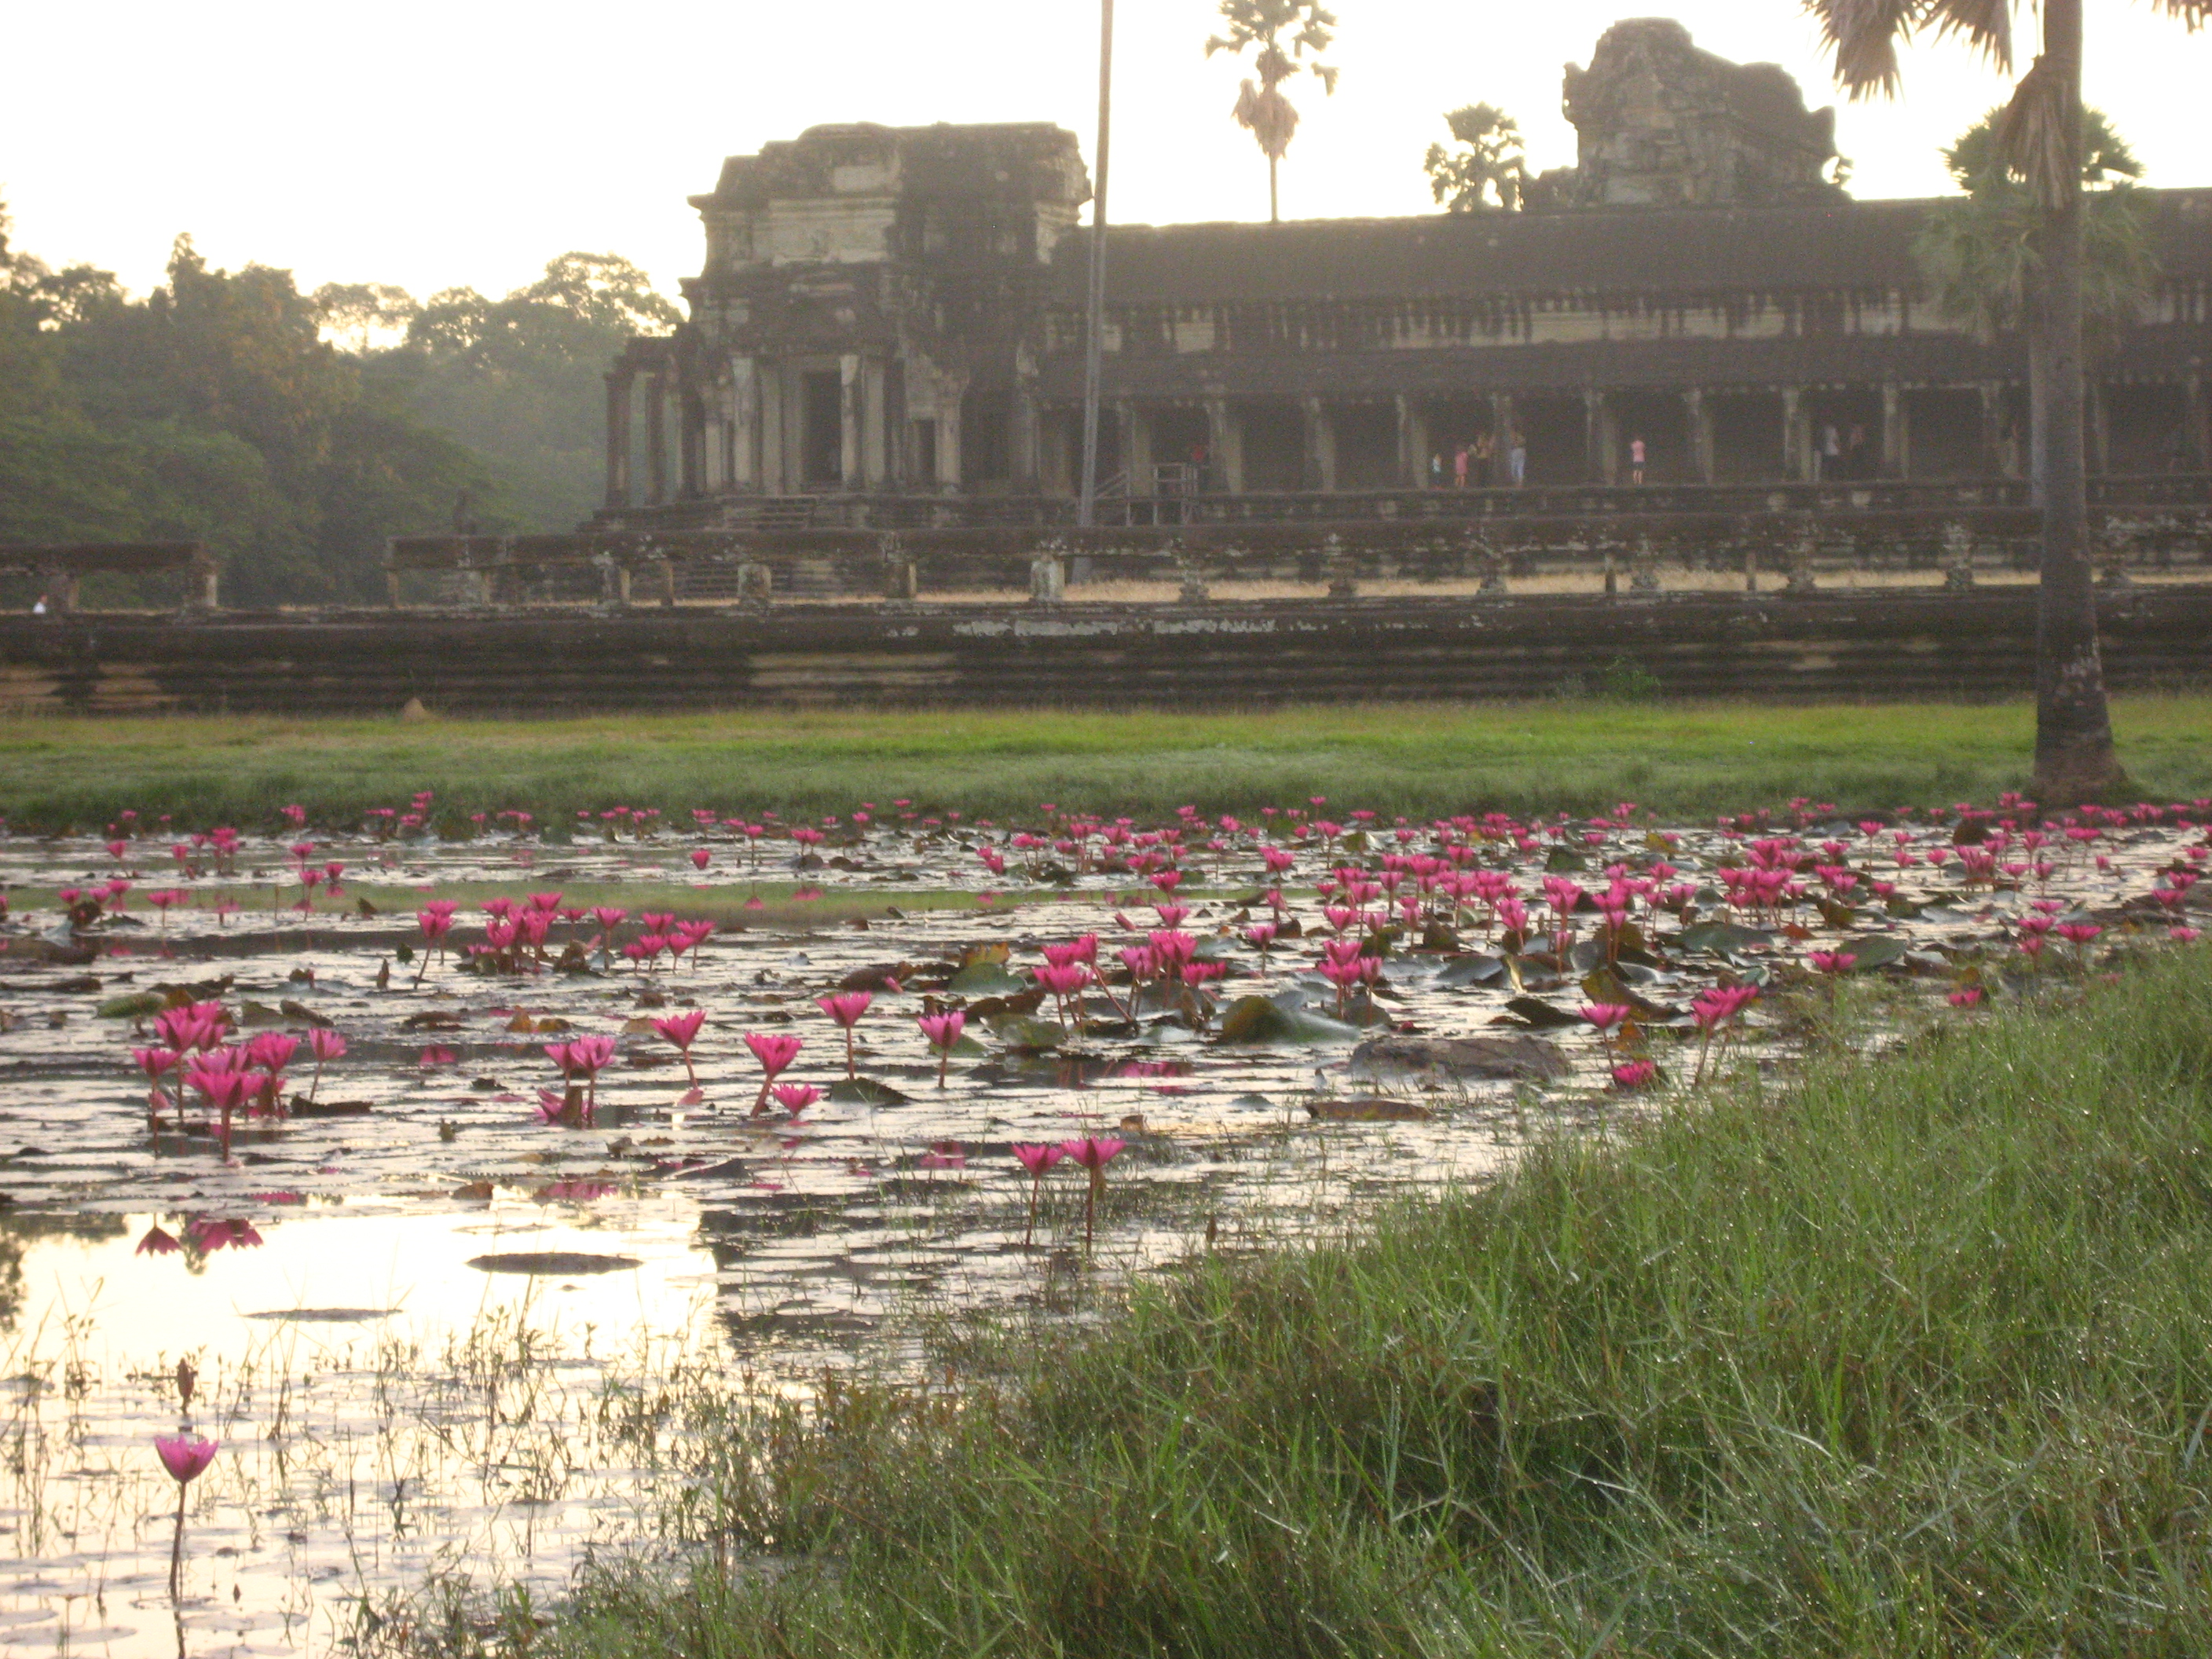 TRAVEL: Siem Reap, Cambodia - TRAVEL: Siem Reap Cambodia by popular New Jersey travel blogger What's For Dinner Esq.